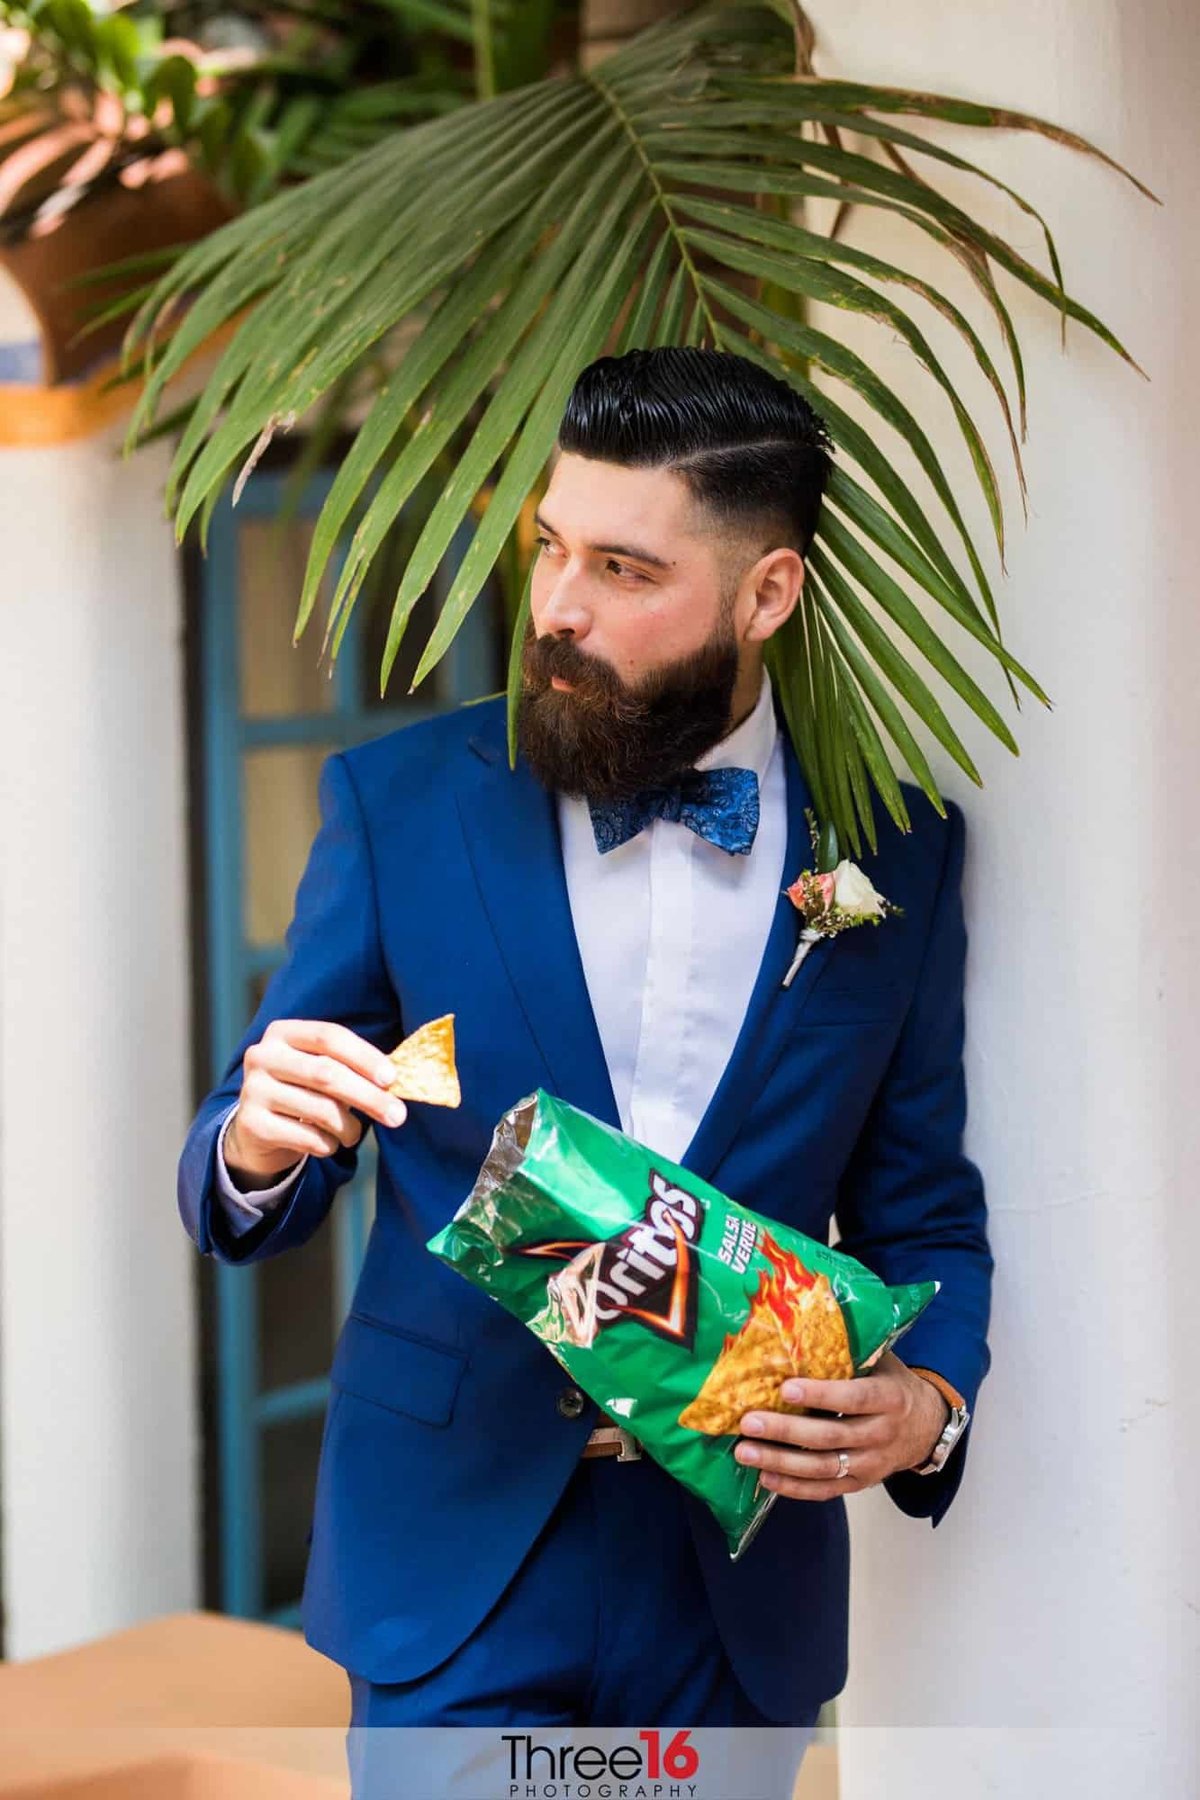 Groom is off to the side eating from a bag of Doritos prior to the wedding